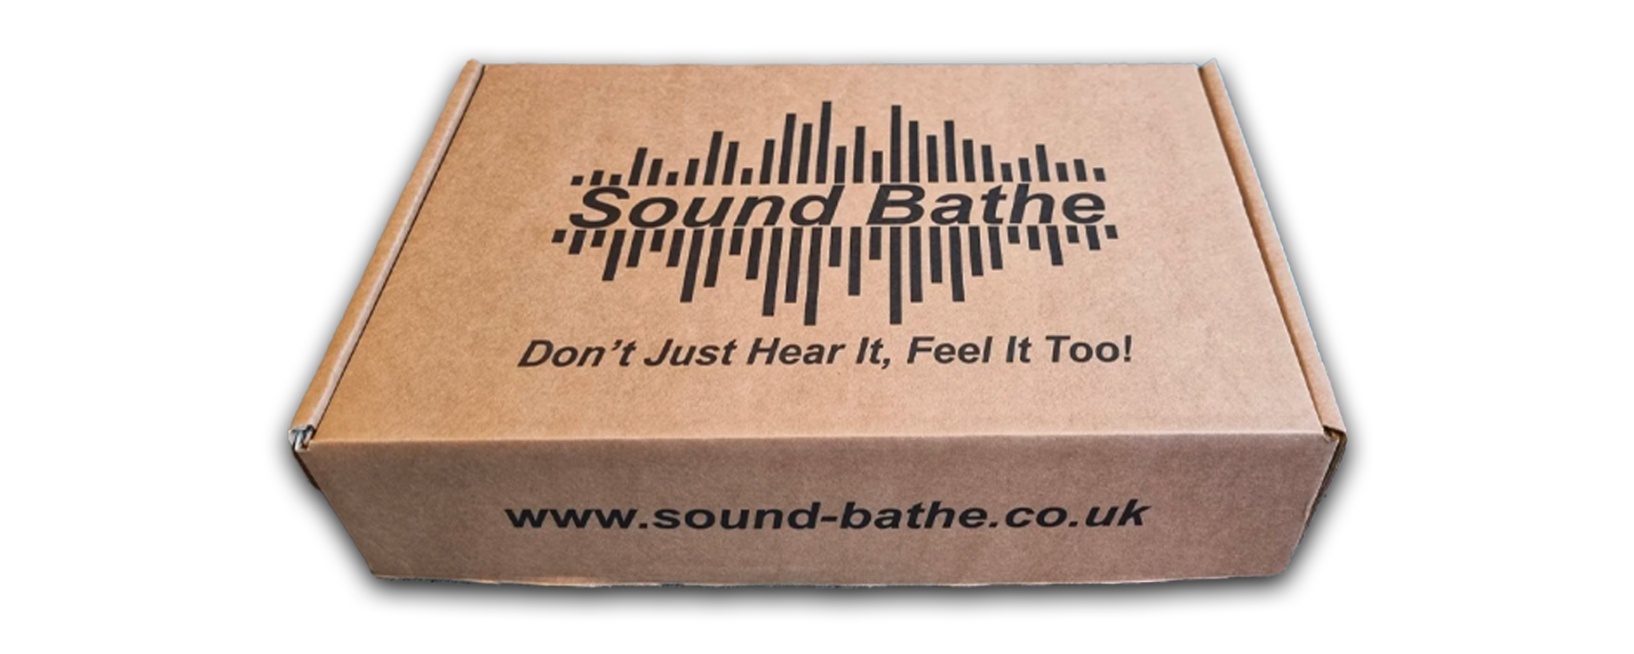 Bespoke corrugated cardbox box with black text that details the Sound Bathe product inside